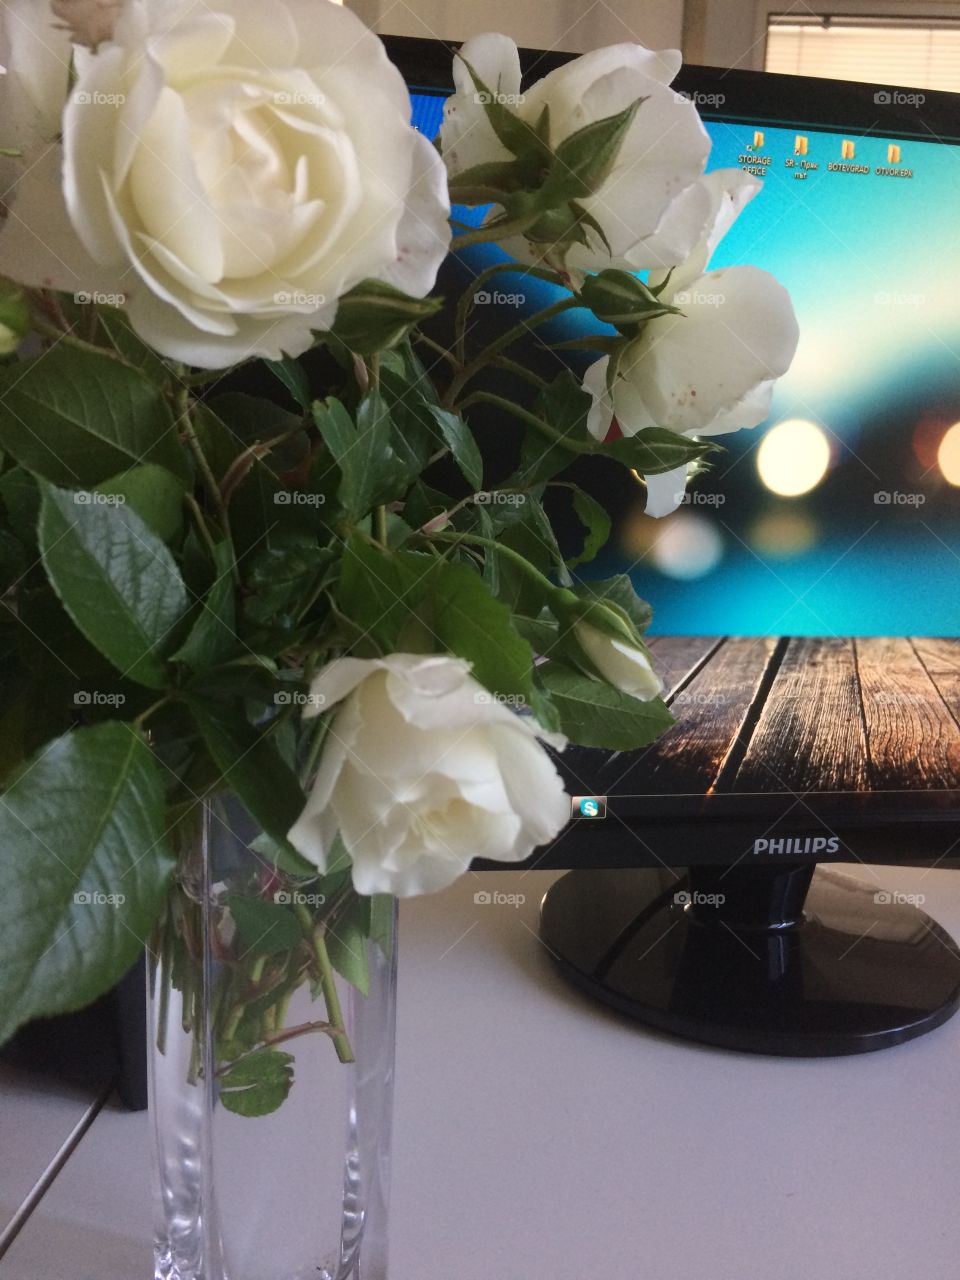 Roses in the office